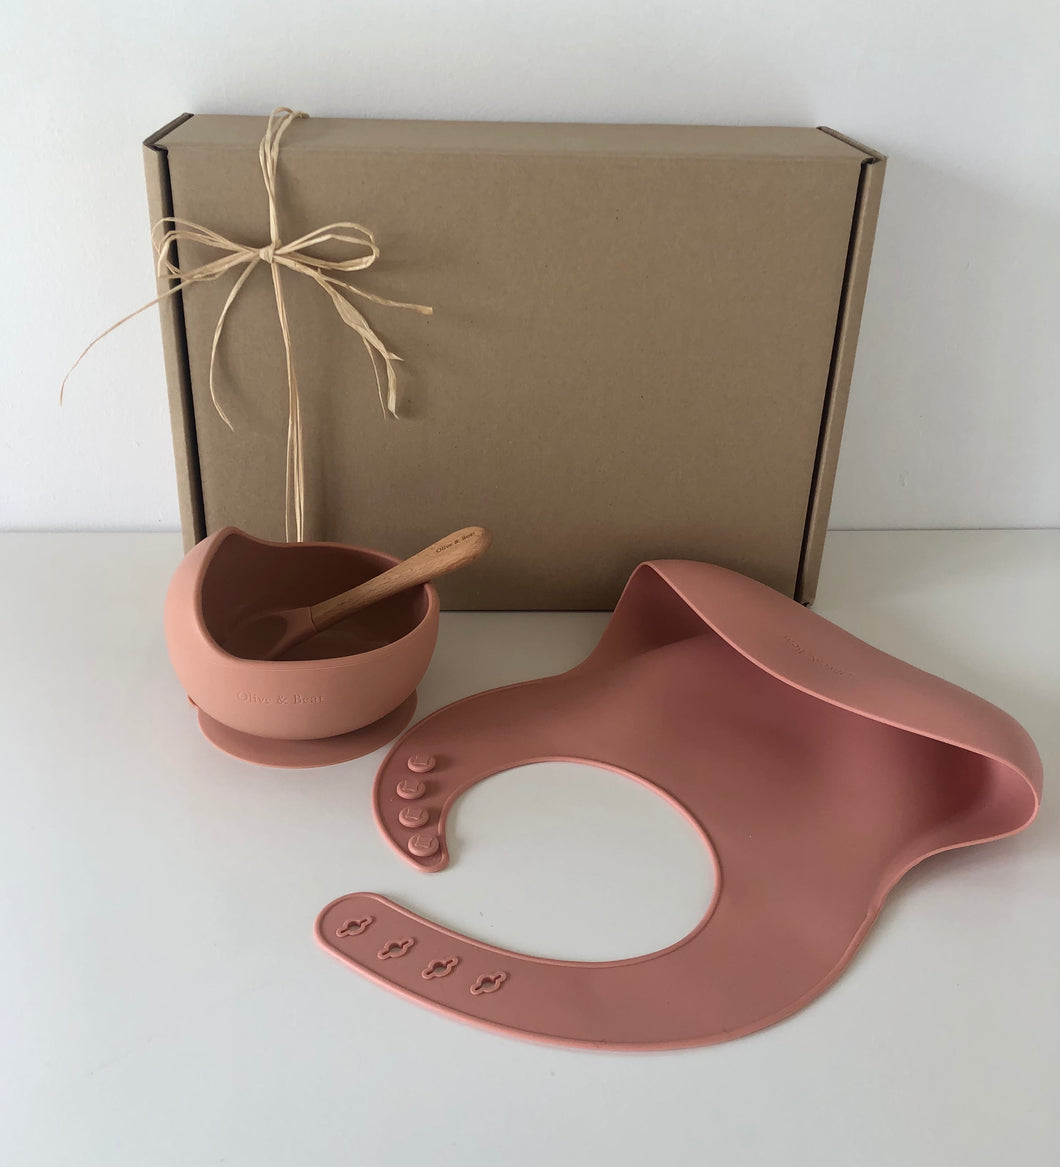 Baby Weaning Set | 𝟻 𝙲𝚘𝚕𝚘𝚞𝚛𝚜